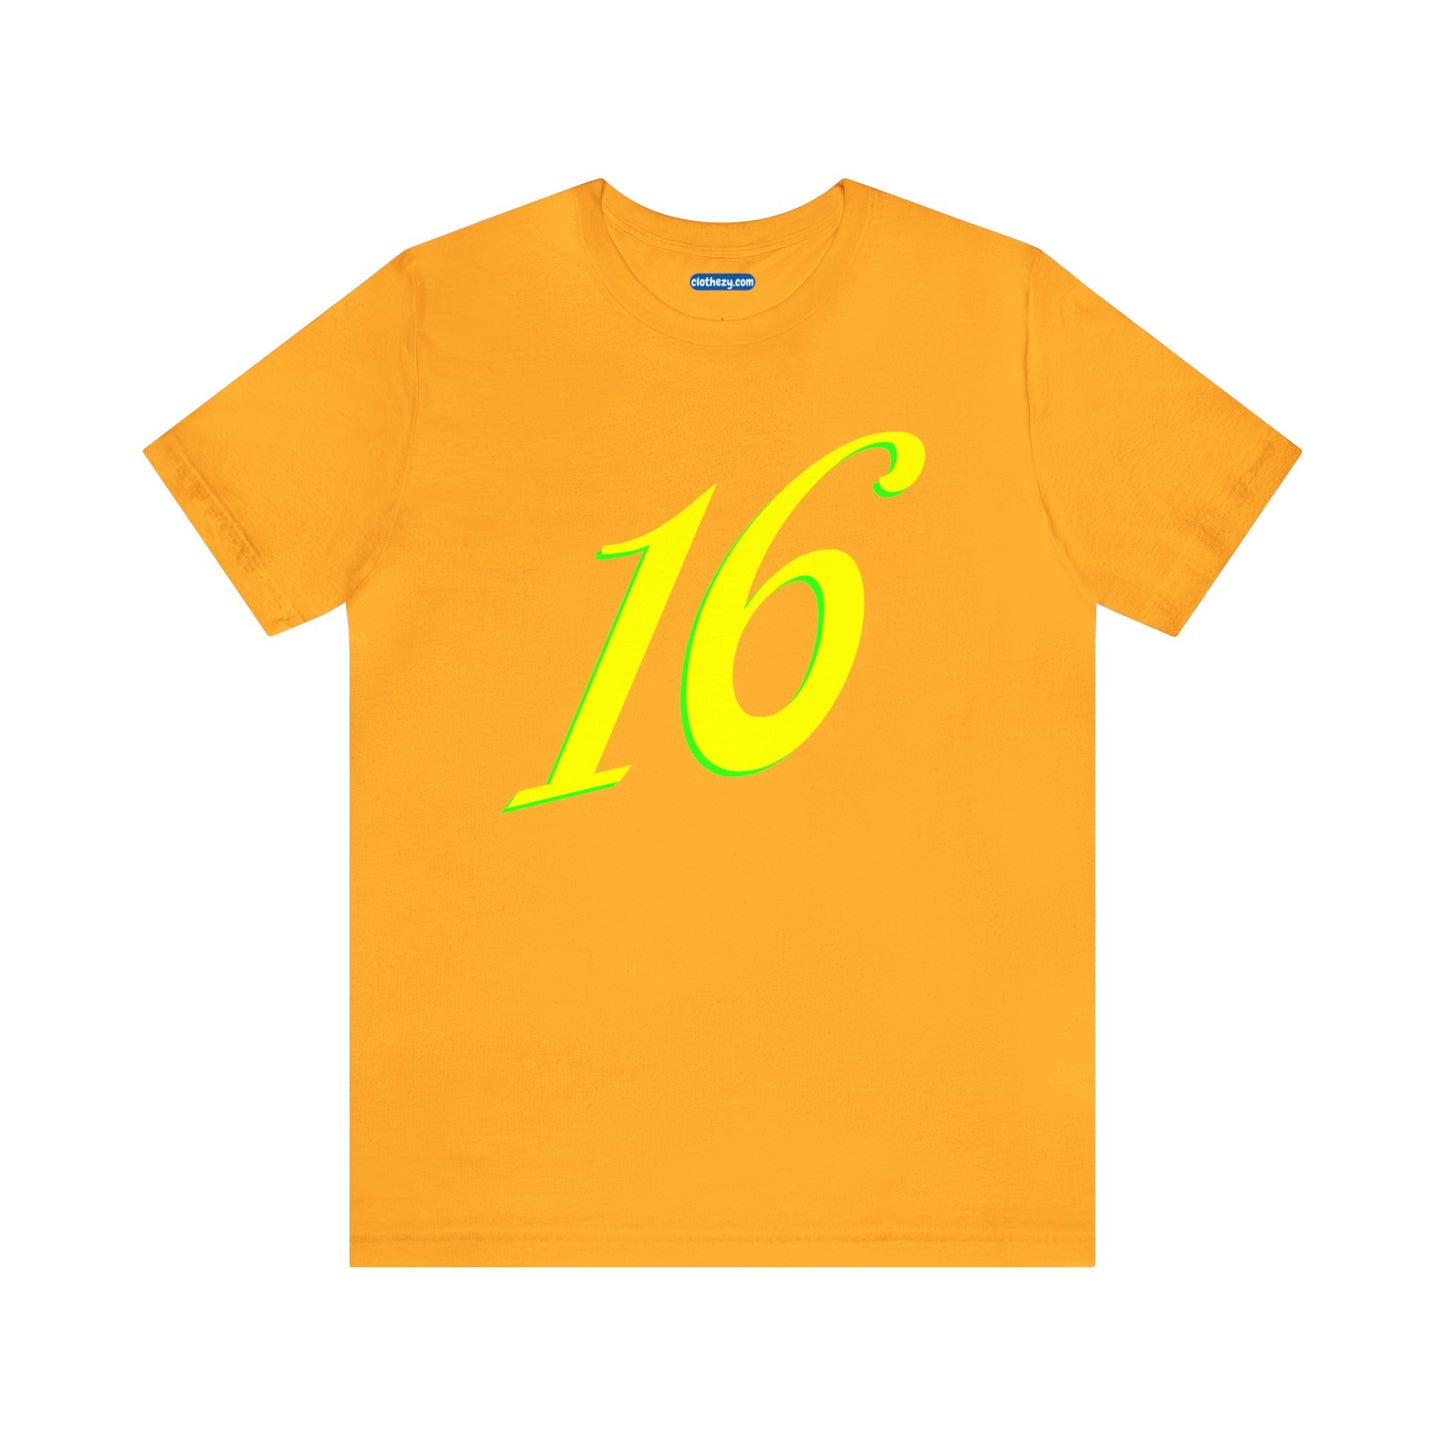 Number 16 Design - Soft Cotton Tee for birthdays and celebrations, Gift for friends and family, Multiple Options by clothezy.com in Green Heather Size Small - Buy Now